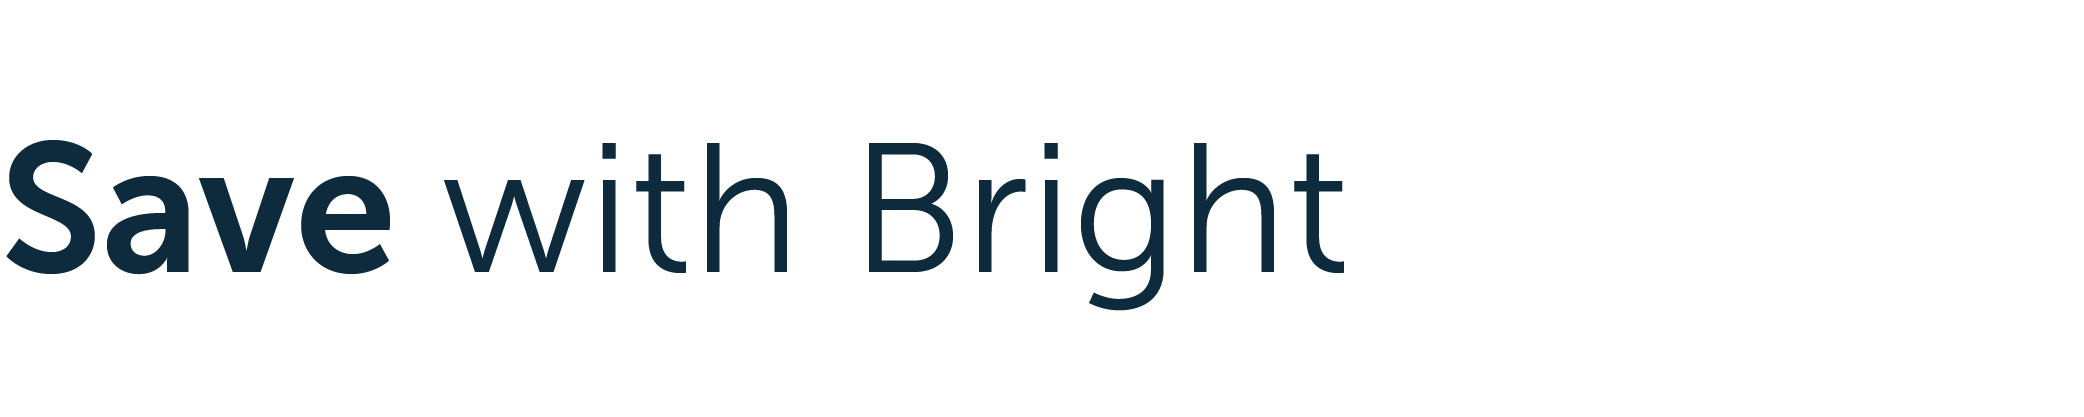 Save with Bright